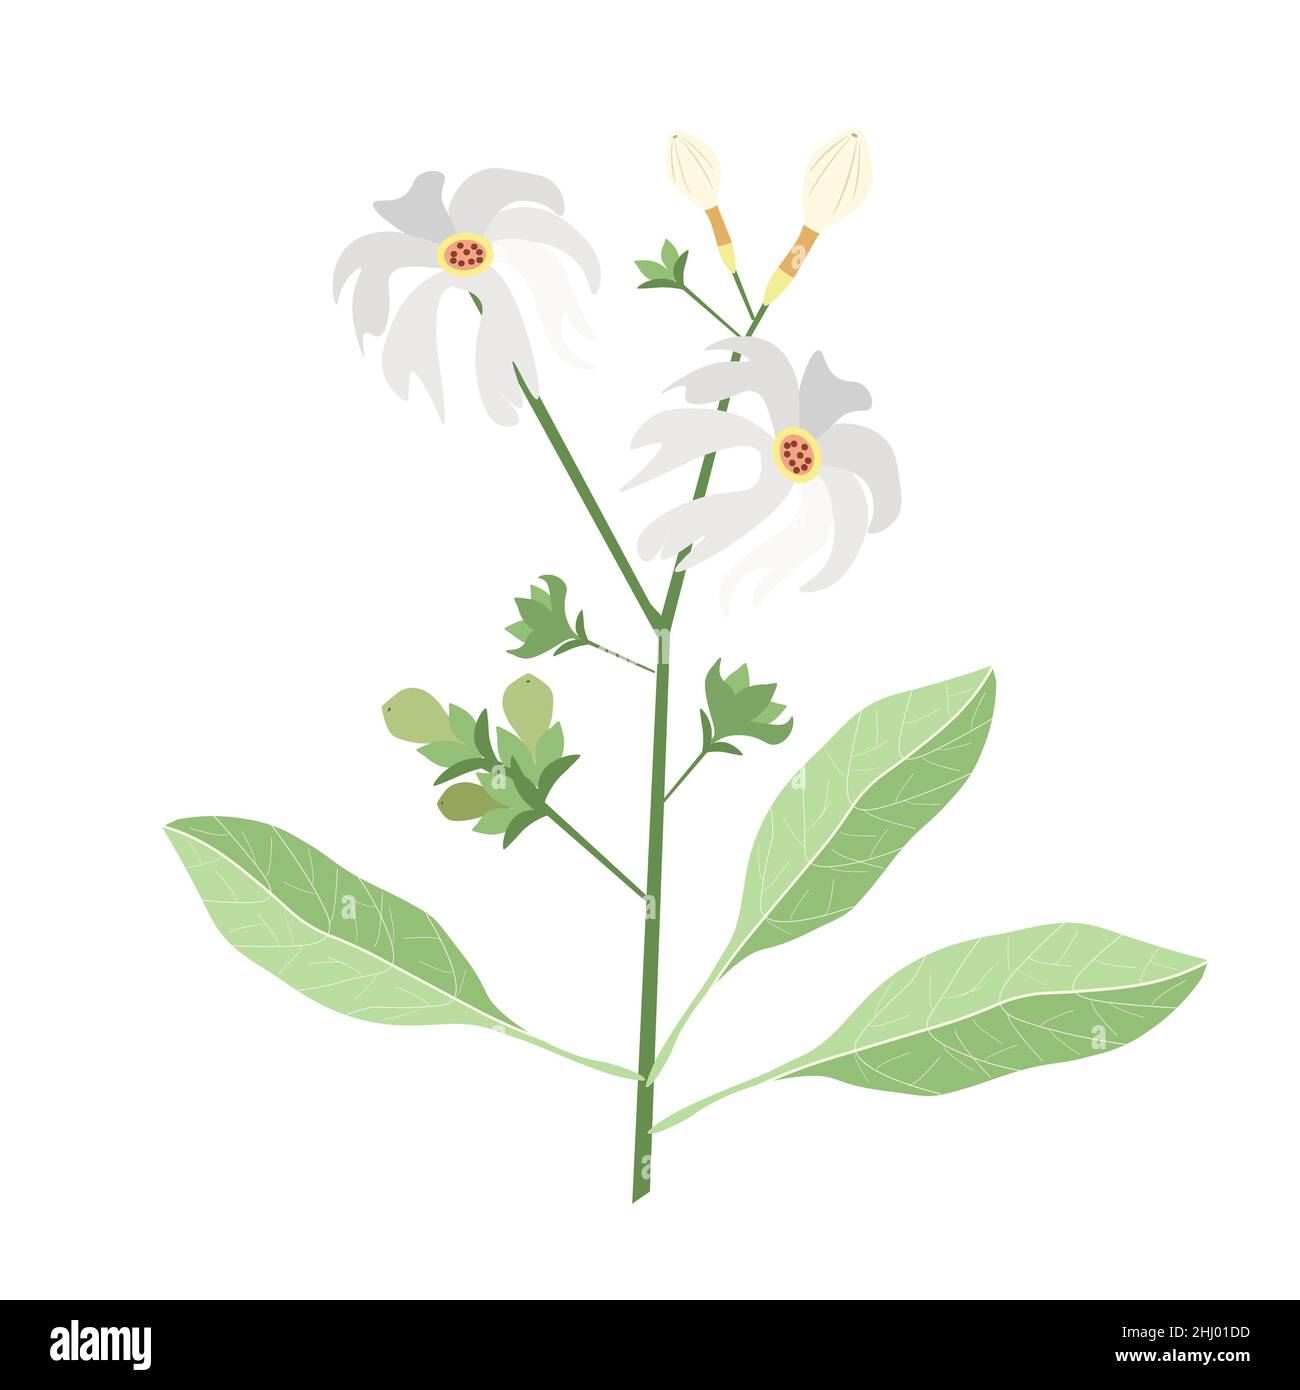 Beautiful Flower, Illustration of Nyctanthes Arbor-tristis or Night Flowering Jasmine with Green Leaves. Stock Photo